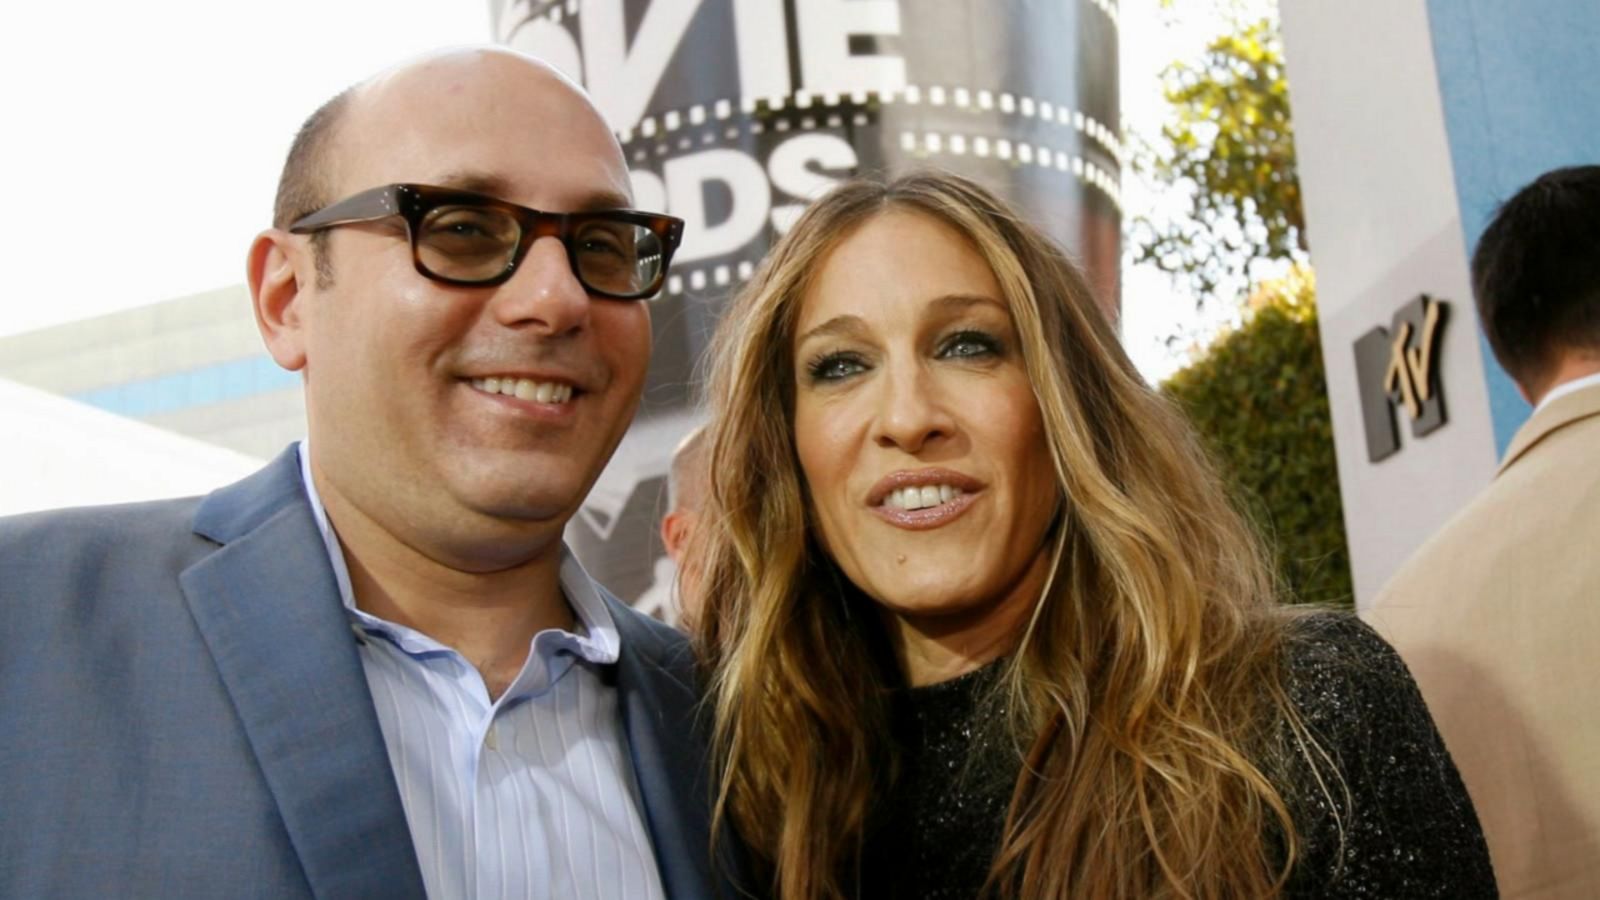 Sex and the City stars pay tribute to late Willie Garson